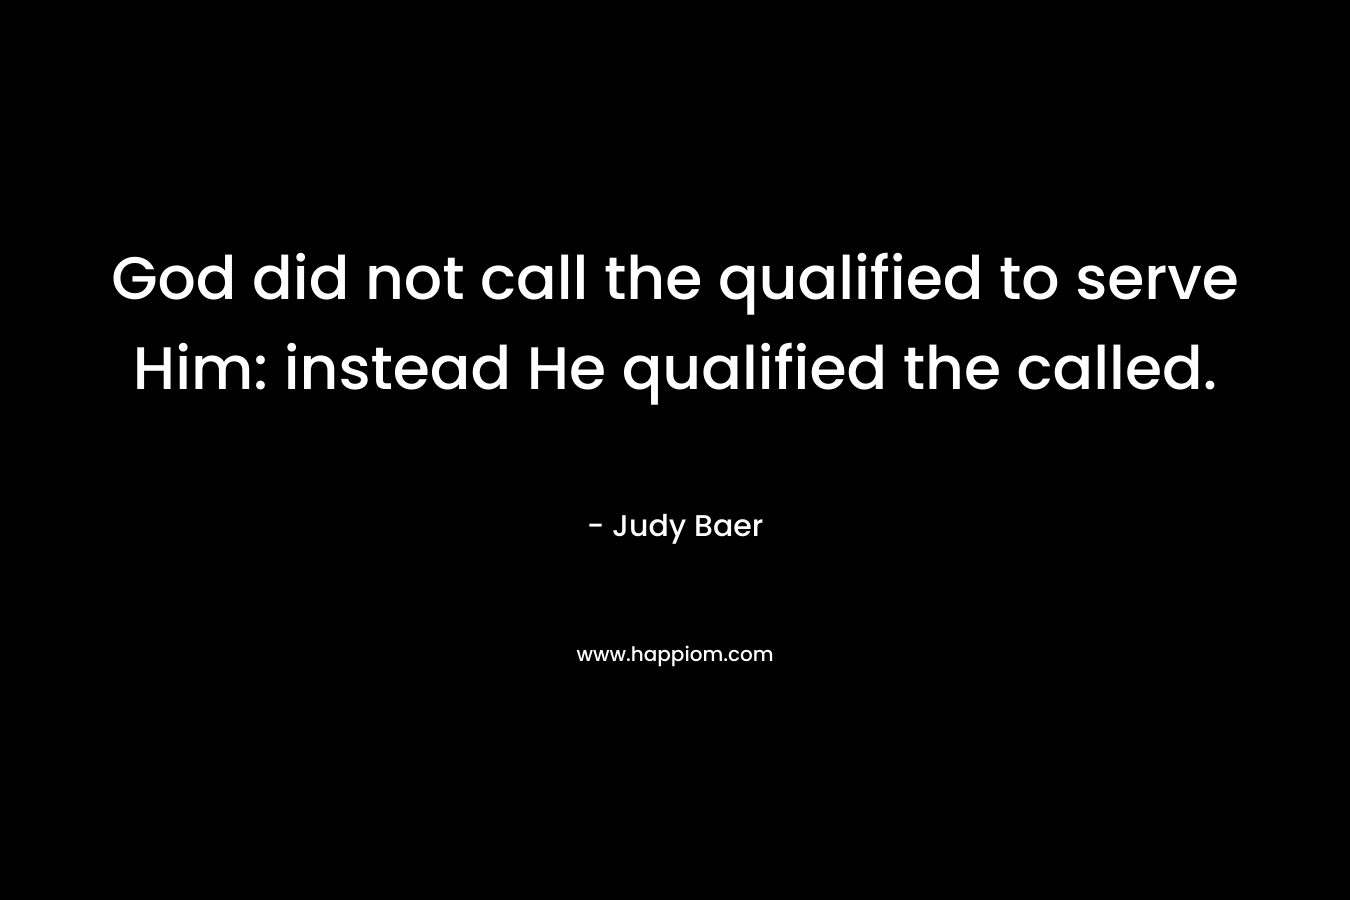 God did not call the qualified to serve Him: instead He qualified the called.